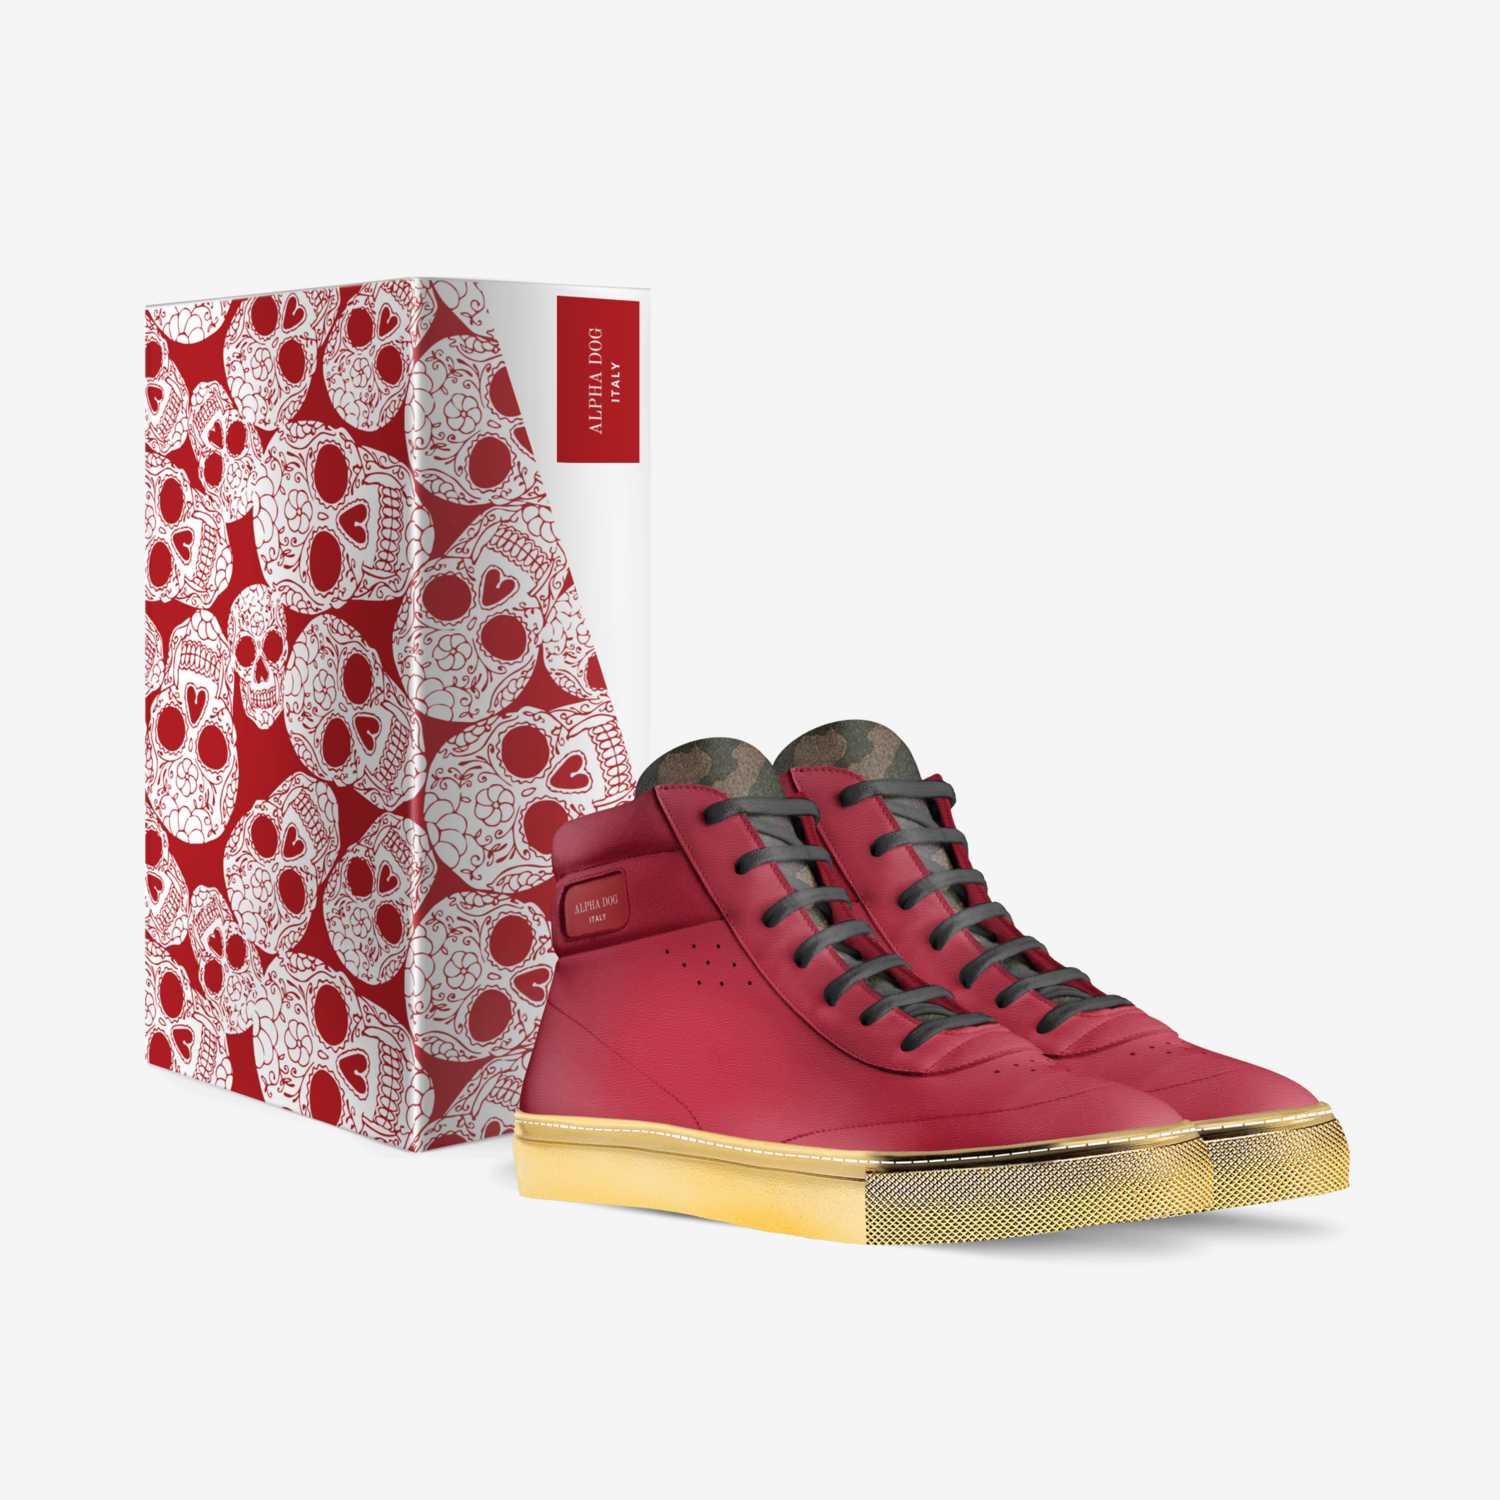 ALPHA DOG custom made in Italy shoes by Fashionmonzter | Box view